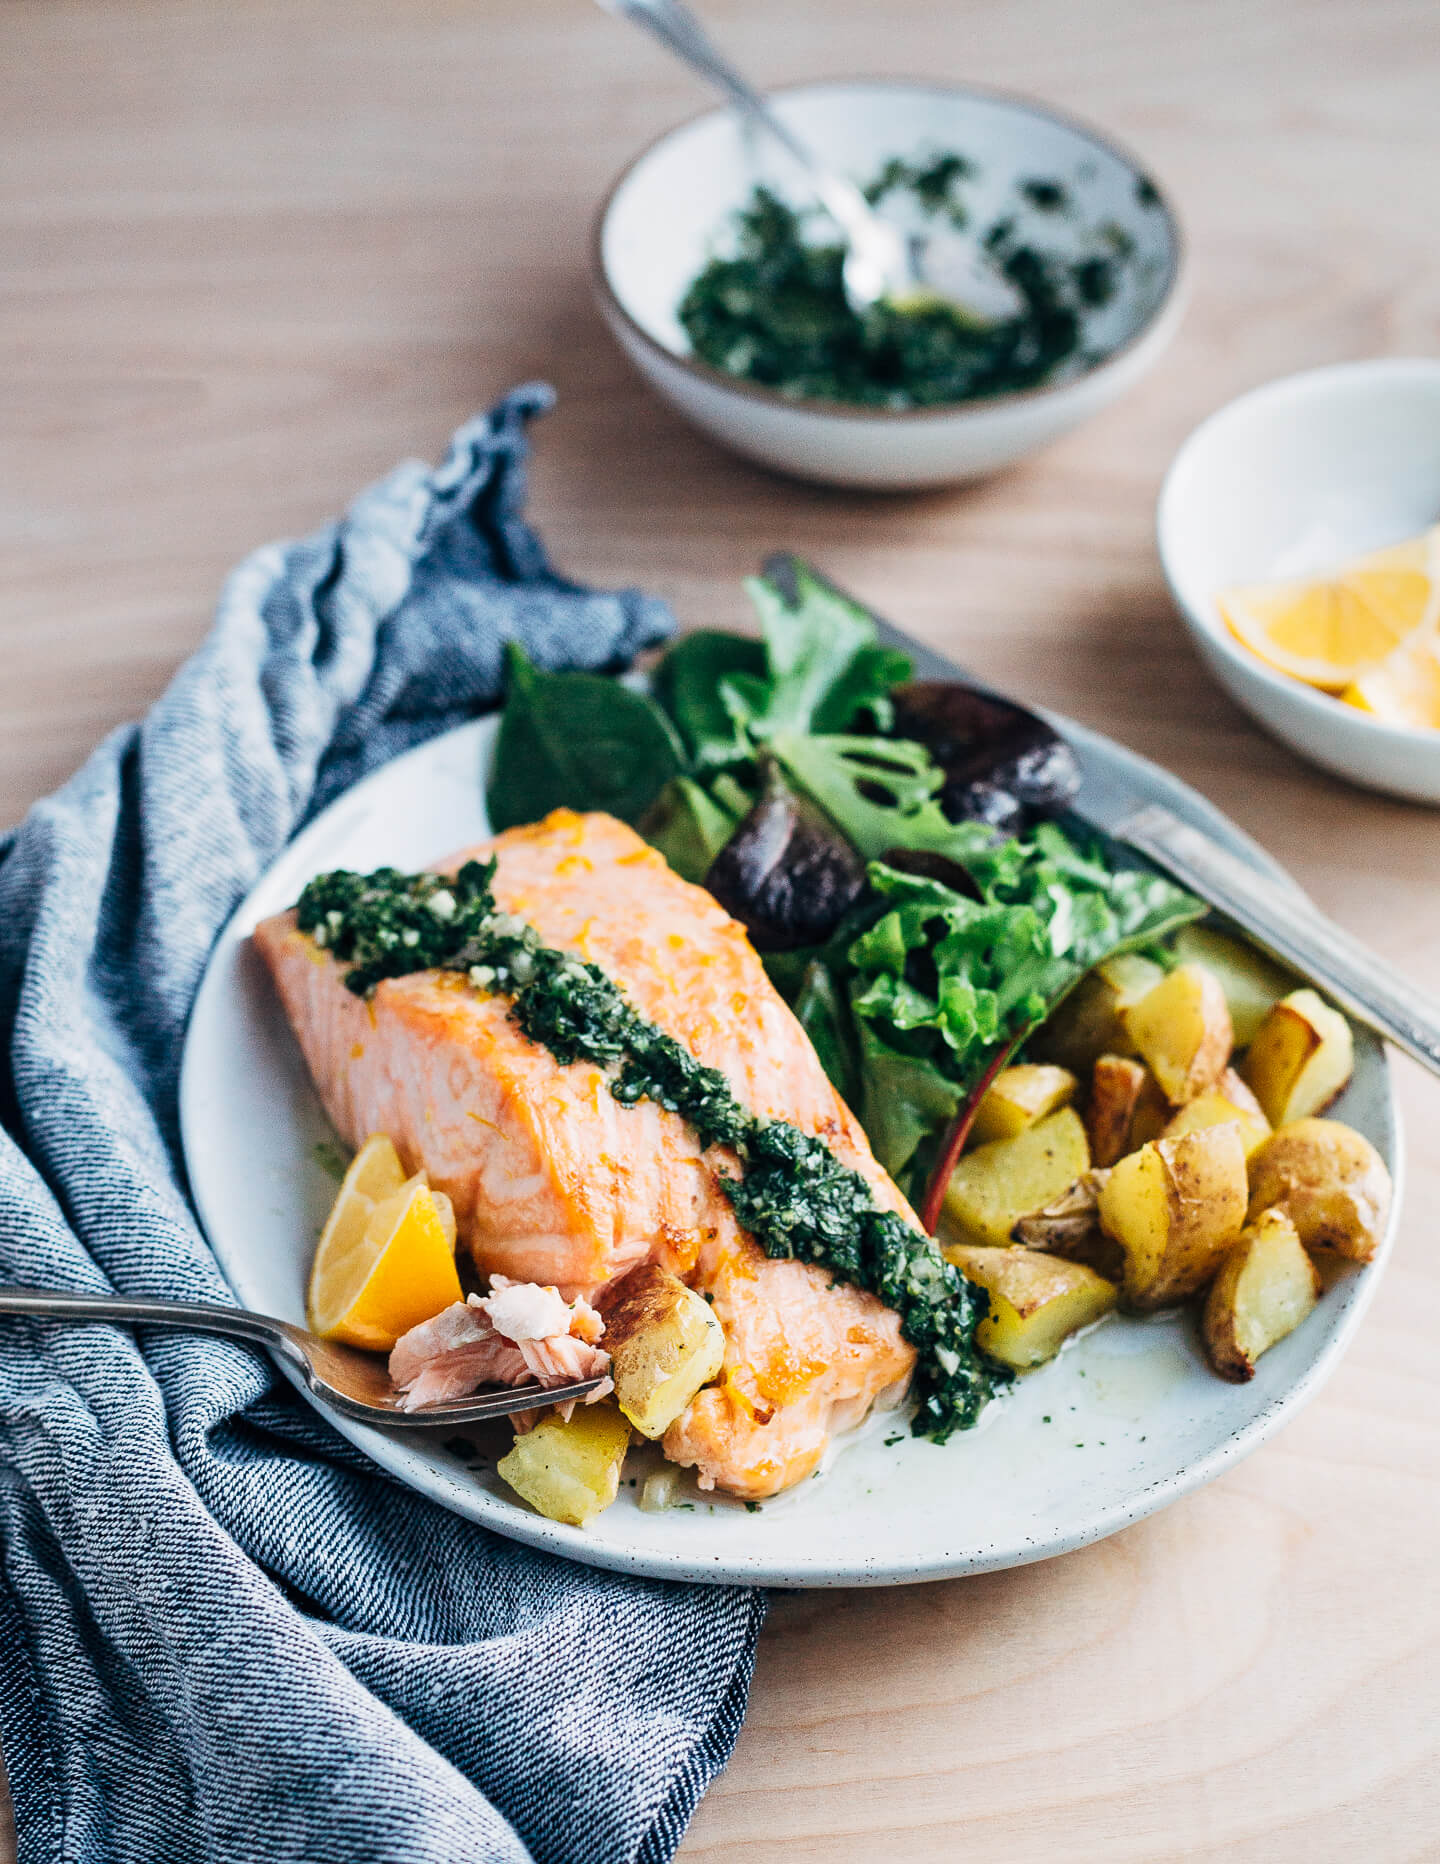 Broiled salmon fillets with a vibrant Meyer lemon and mint chimichurri makes for a simple, yet elevated mid-winter meal that's perfect for a Valentine's dinner at home. 